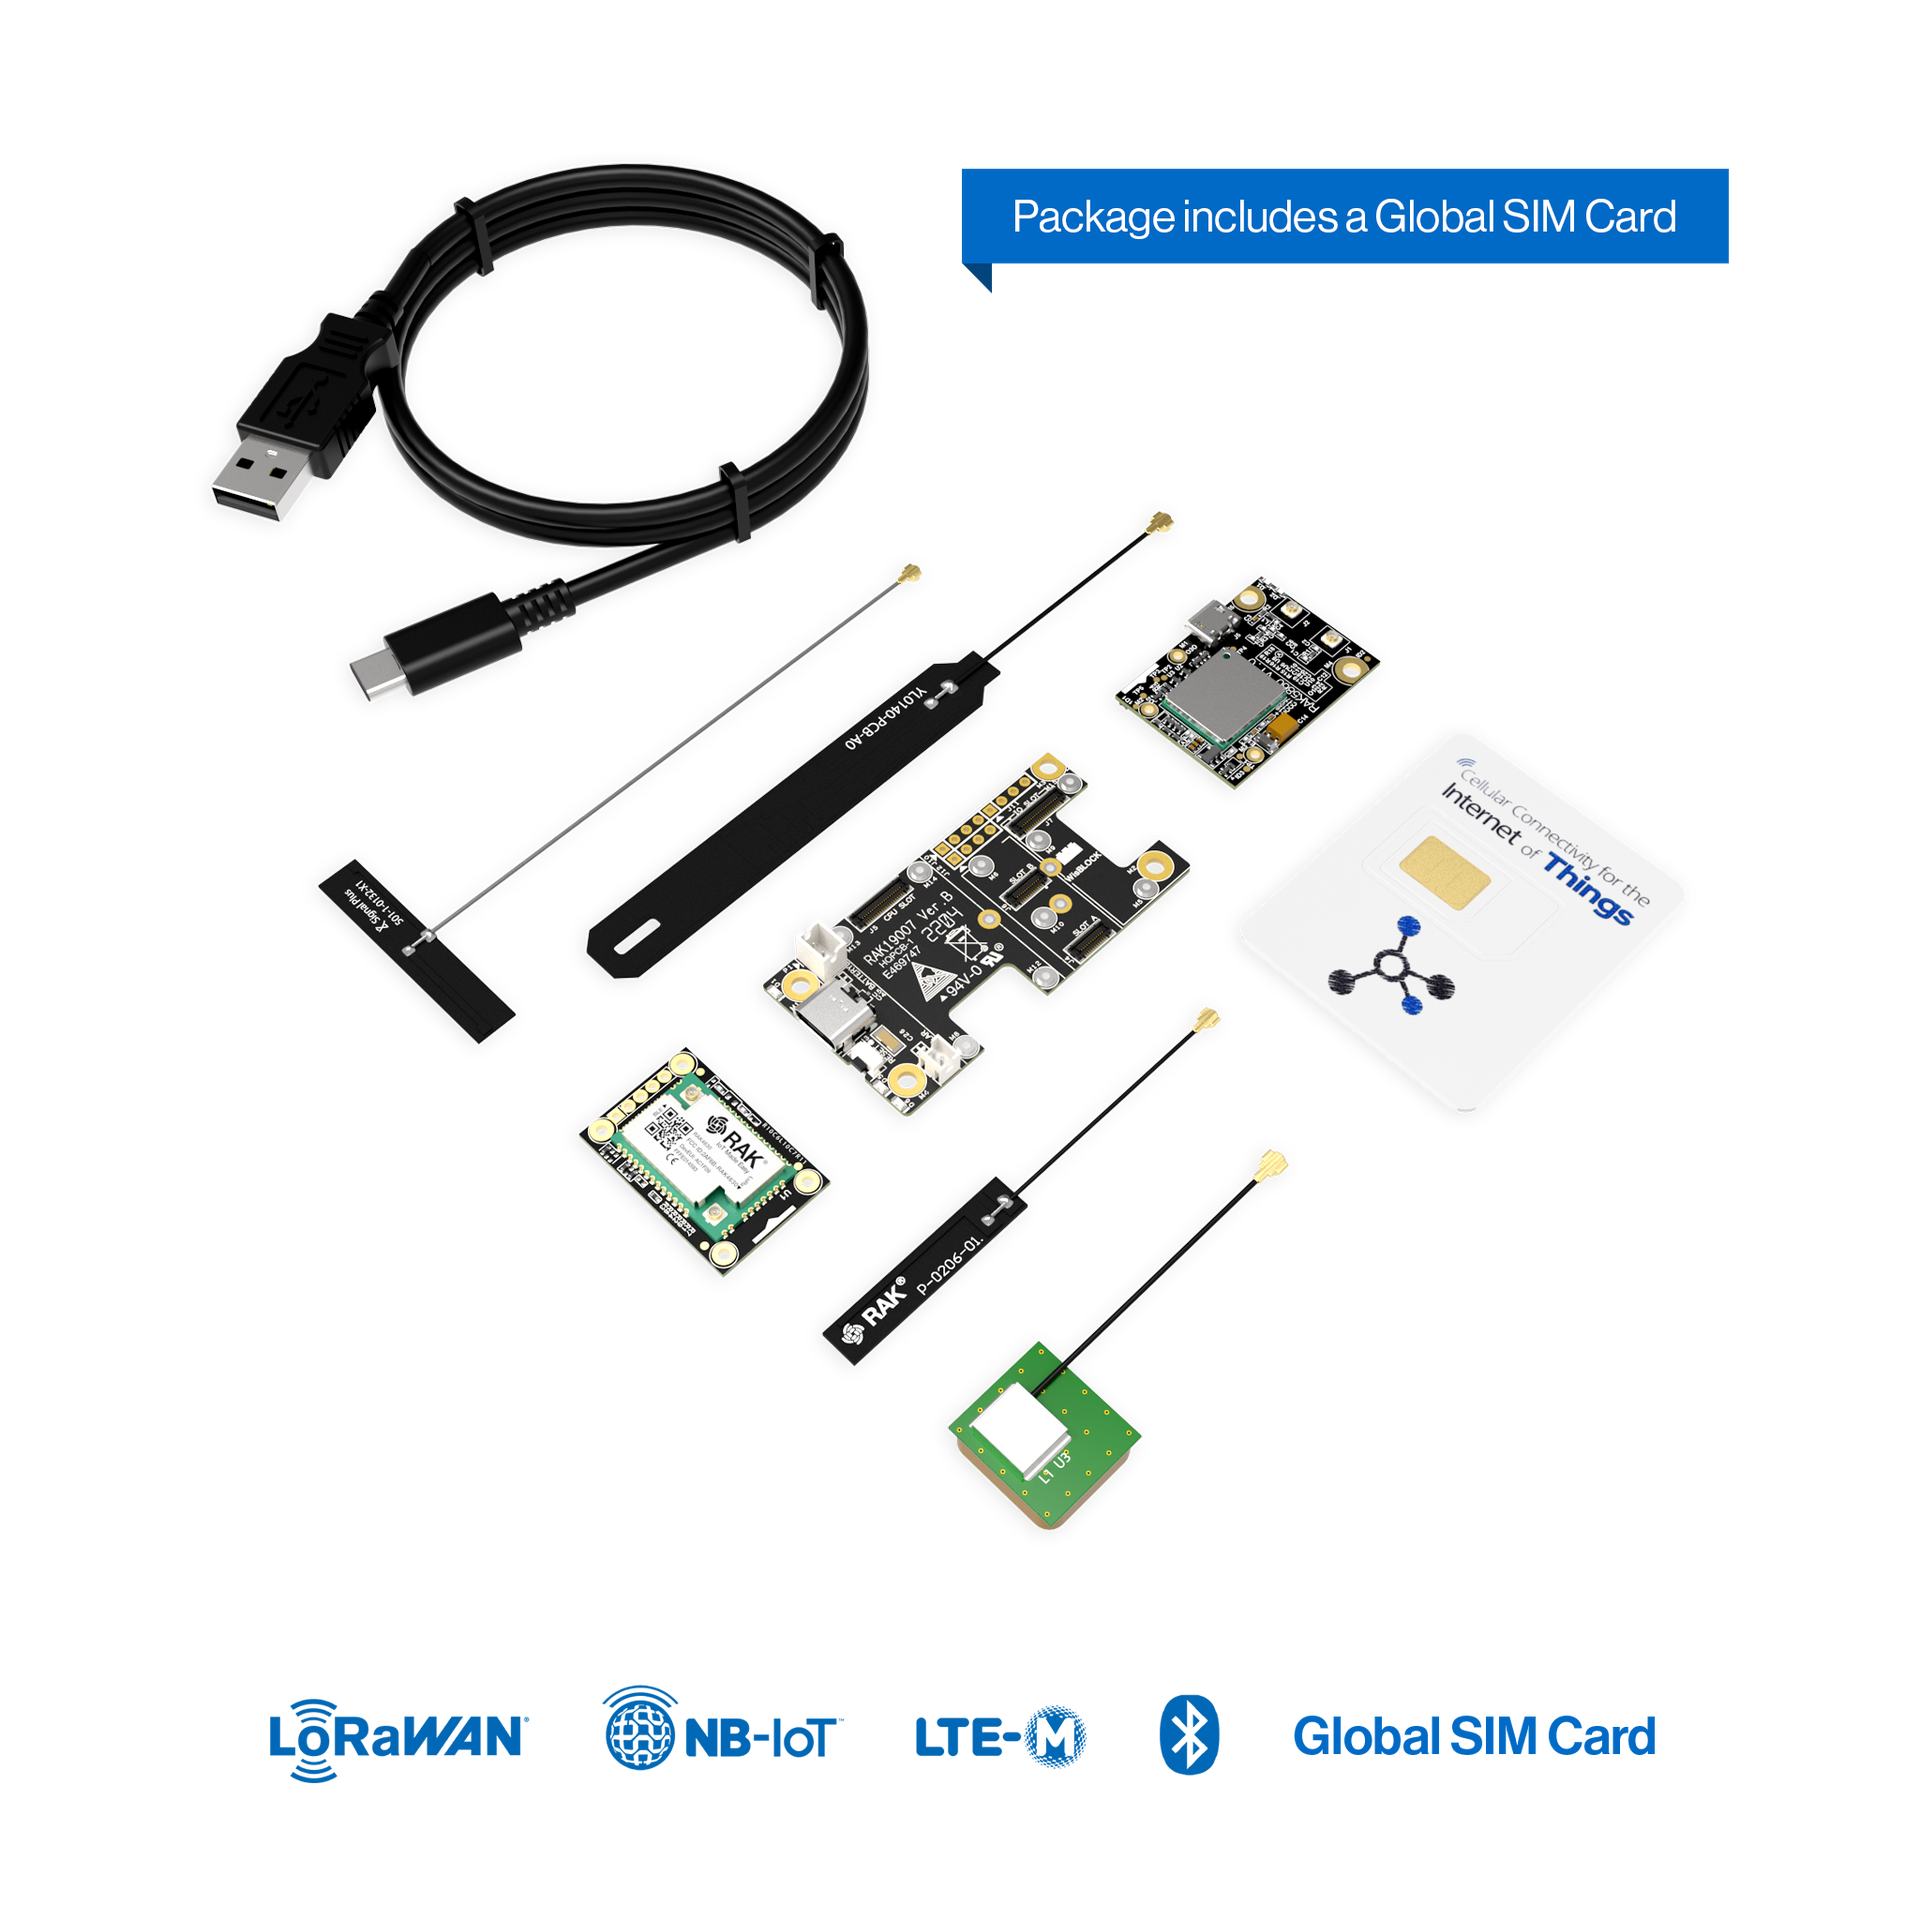 Link.ONE - LTE-M NB-IoT LoRaWAN Device based on nRF52840, SX1262 and BG77 Arduino IDE compatible